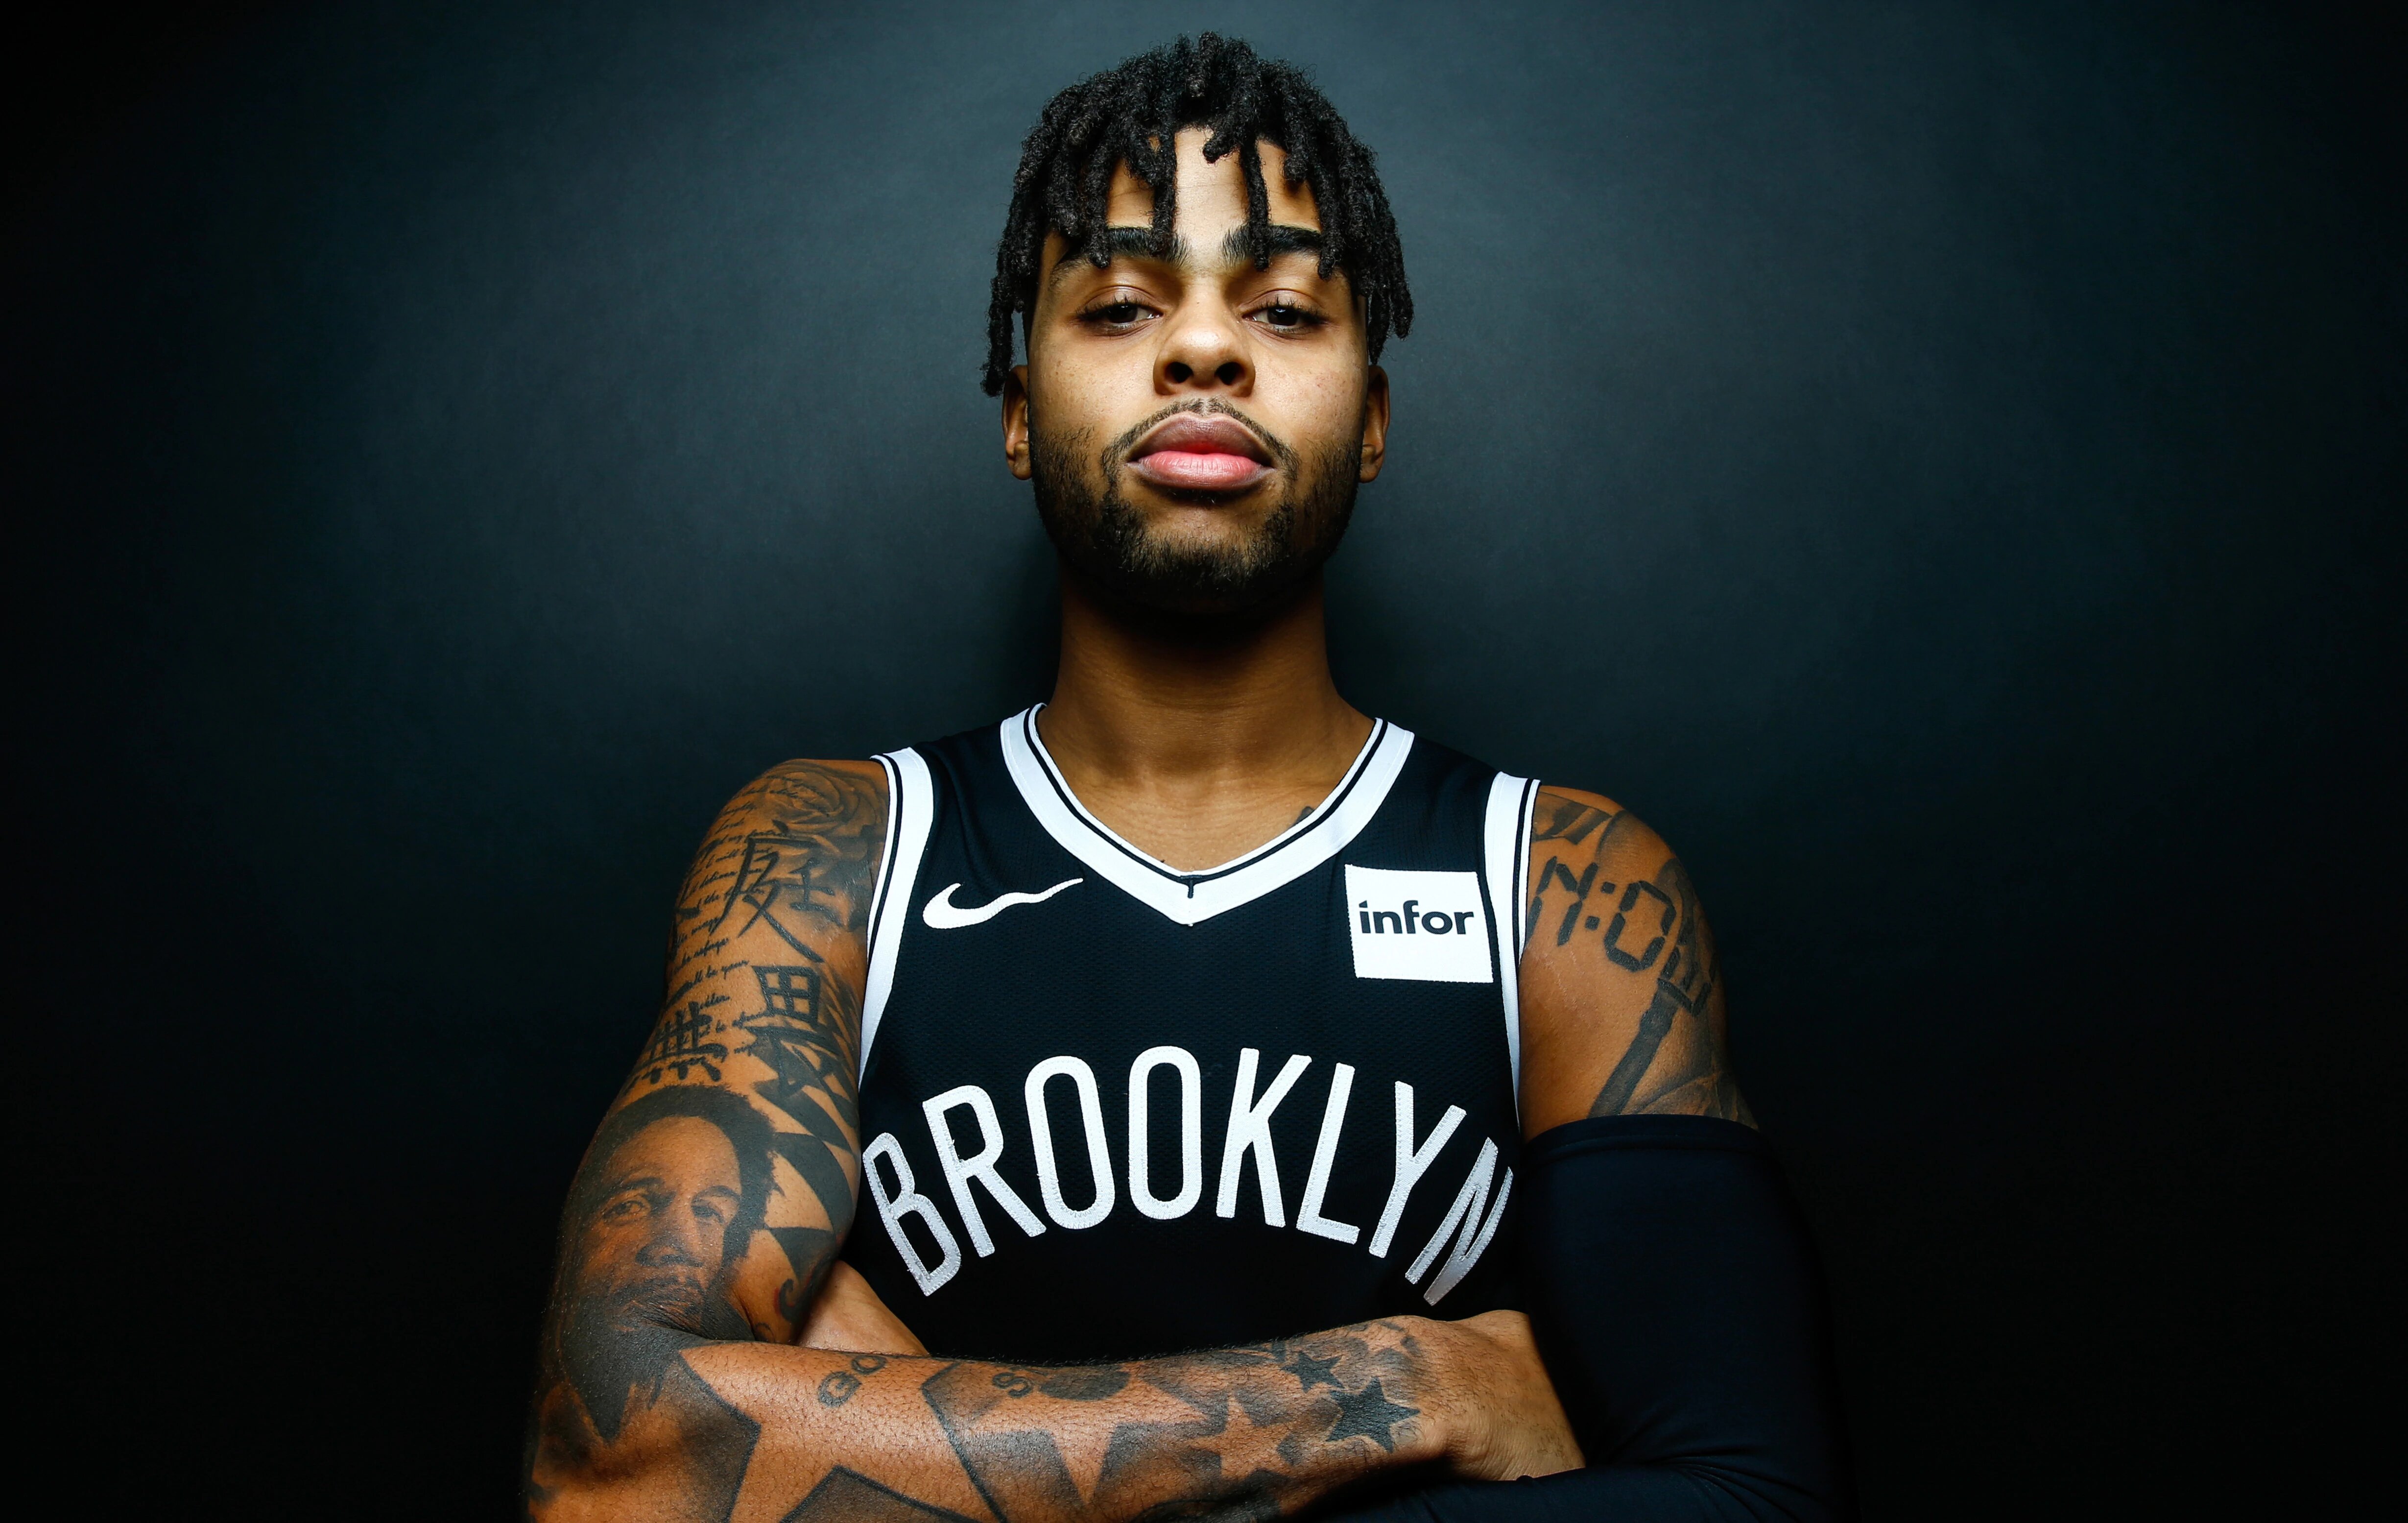 Dangelo russell hd sports k wallpapers images backgrounds photos and pictures